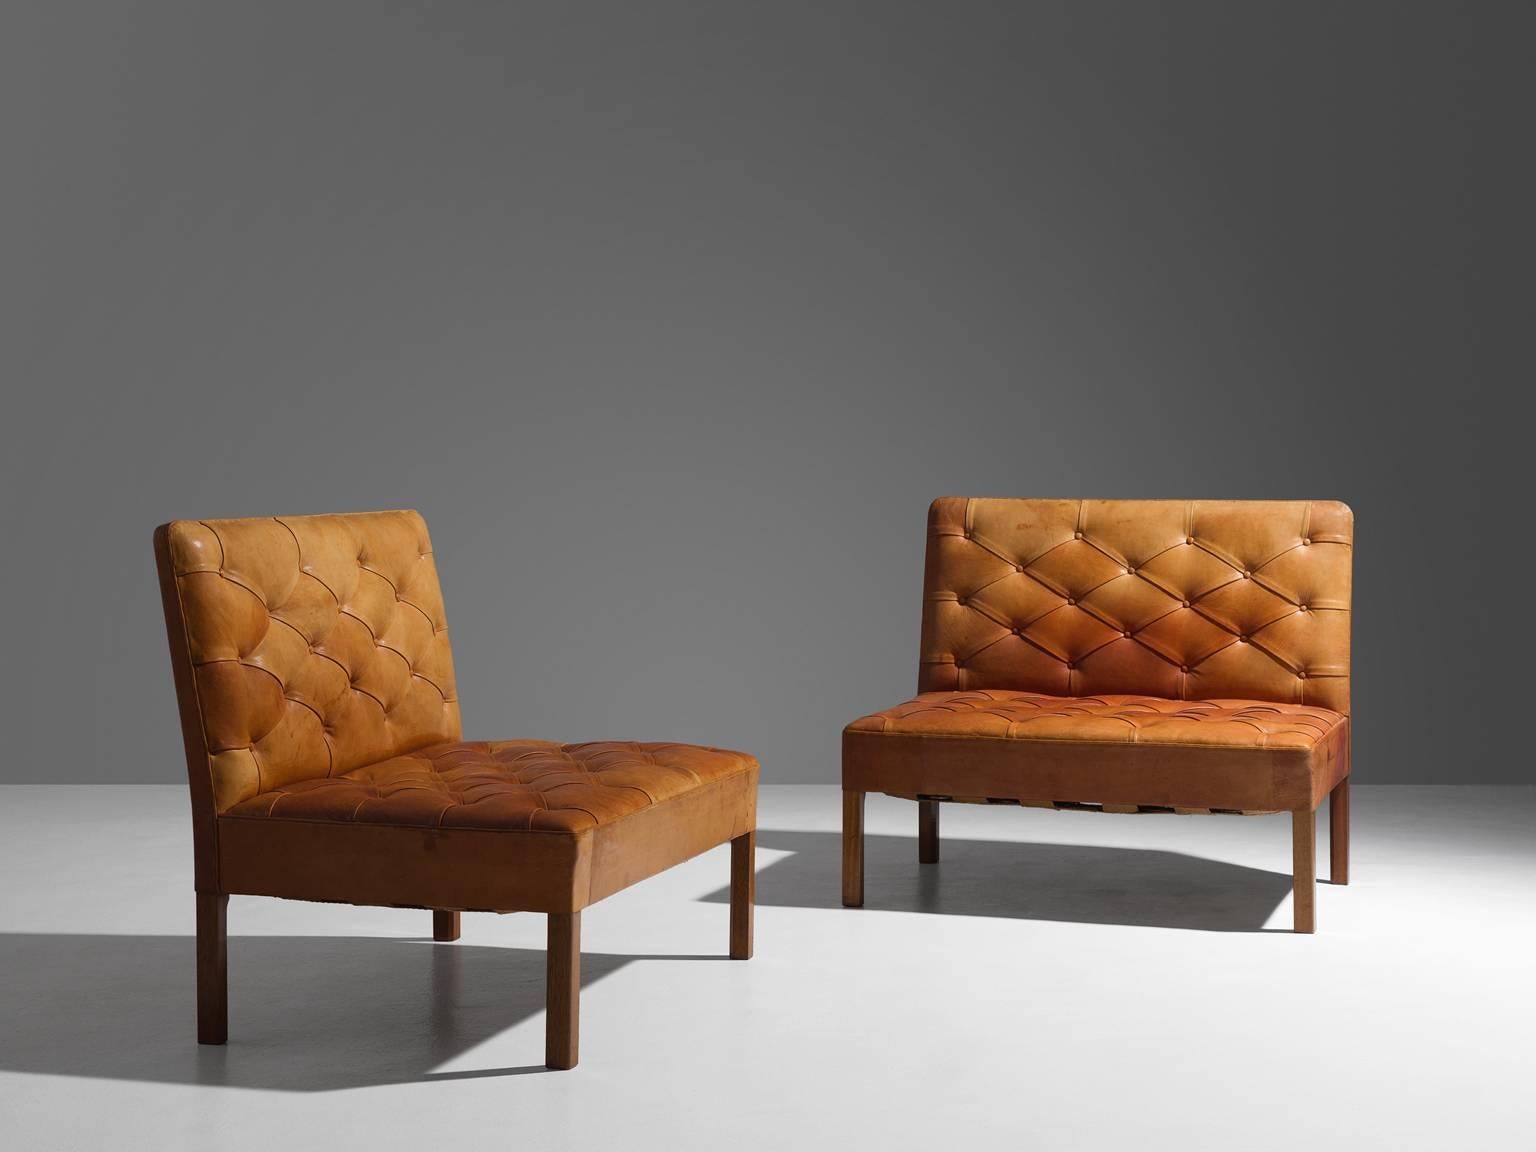 Set of two settee's model 4698, in leather and oak, by Kaare Klint for Rud Rasmussen, Denmark 1933. 

This set of free-standing sofa's is one of the most iconic designs by Kaare Klint. They show a mix of functional, minimalist and at the same time